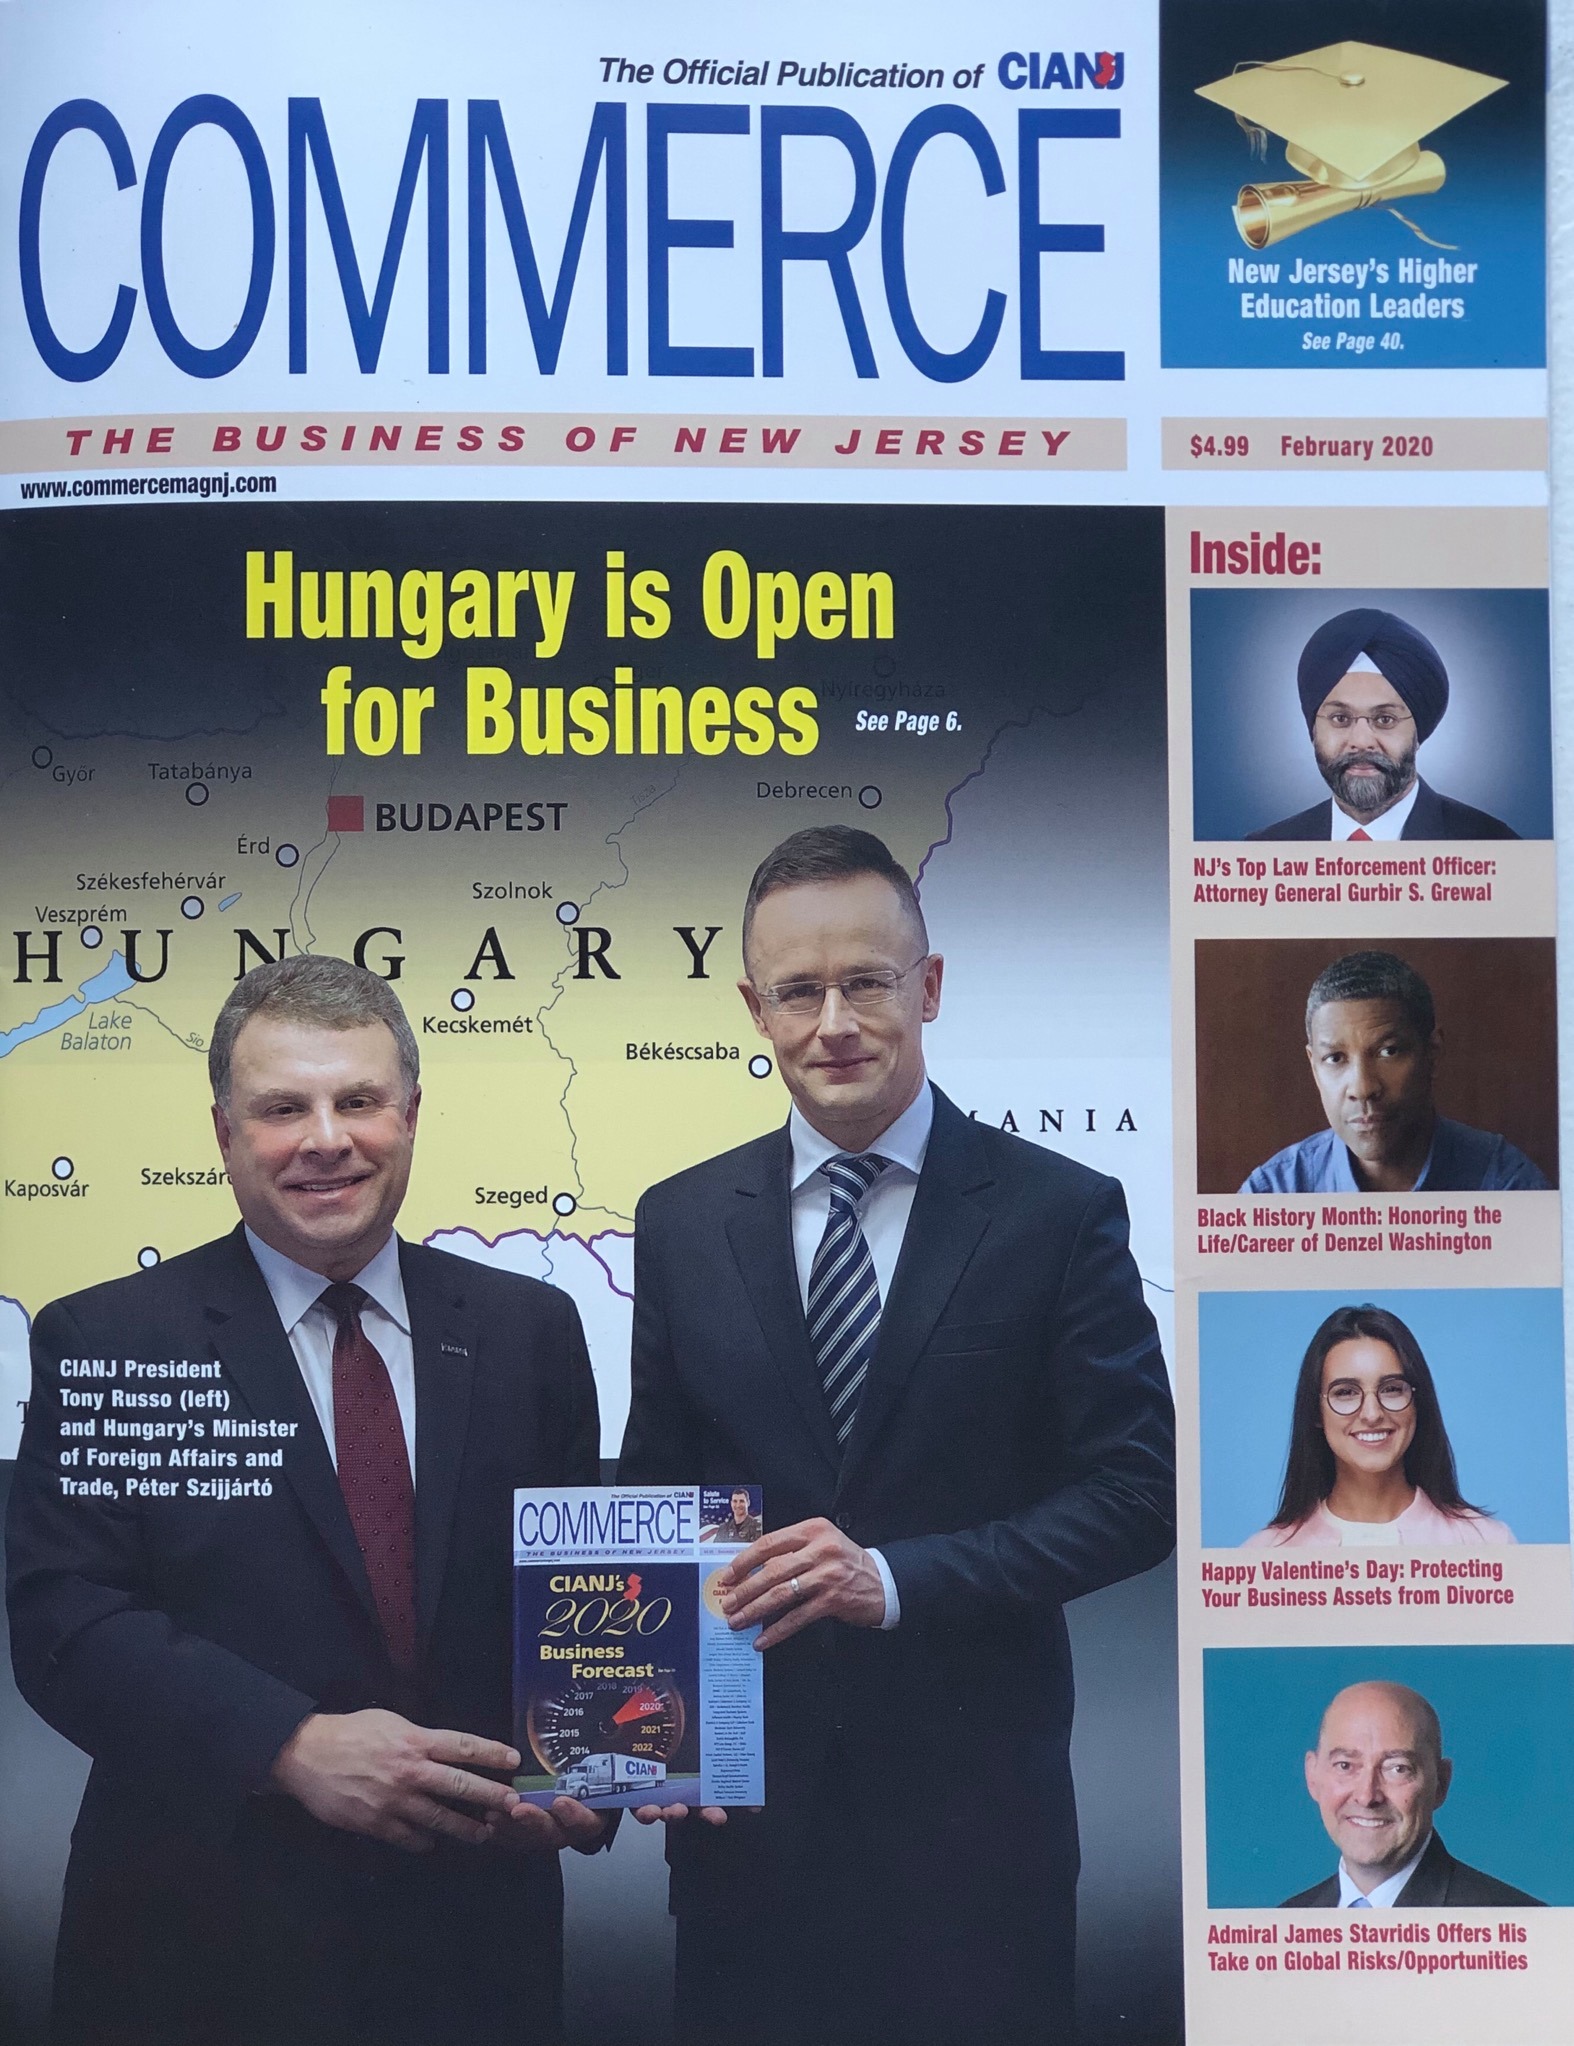 READ the COMMERCE, the Official Publication of CIANJ, the Business of New Jersey